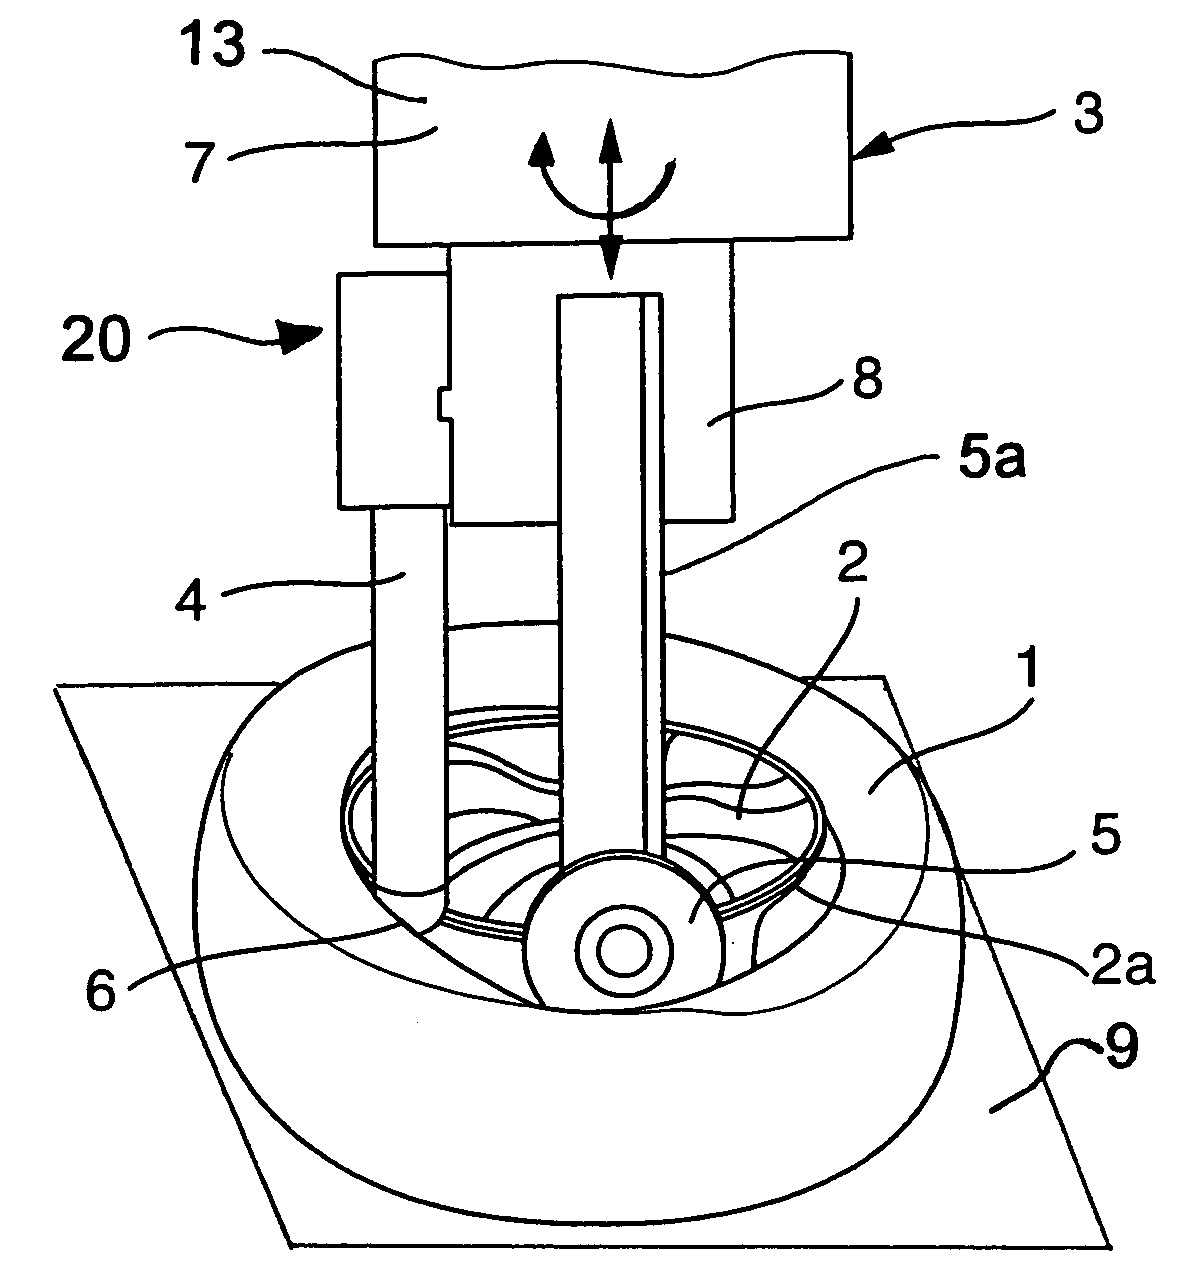 Improper working position detection for tire mounting apparatus and method